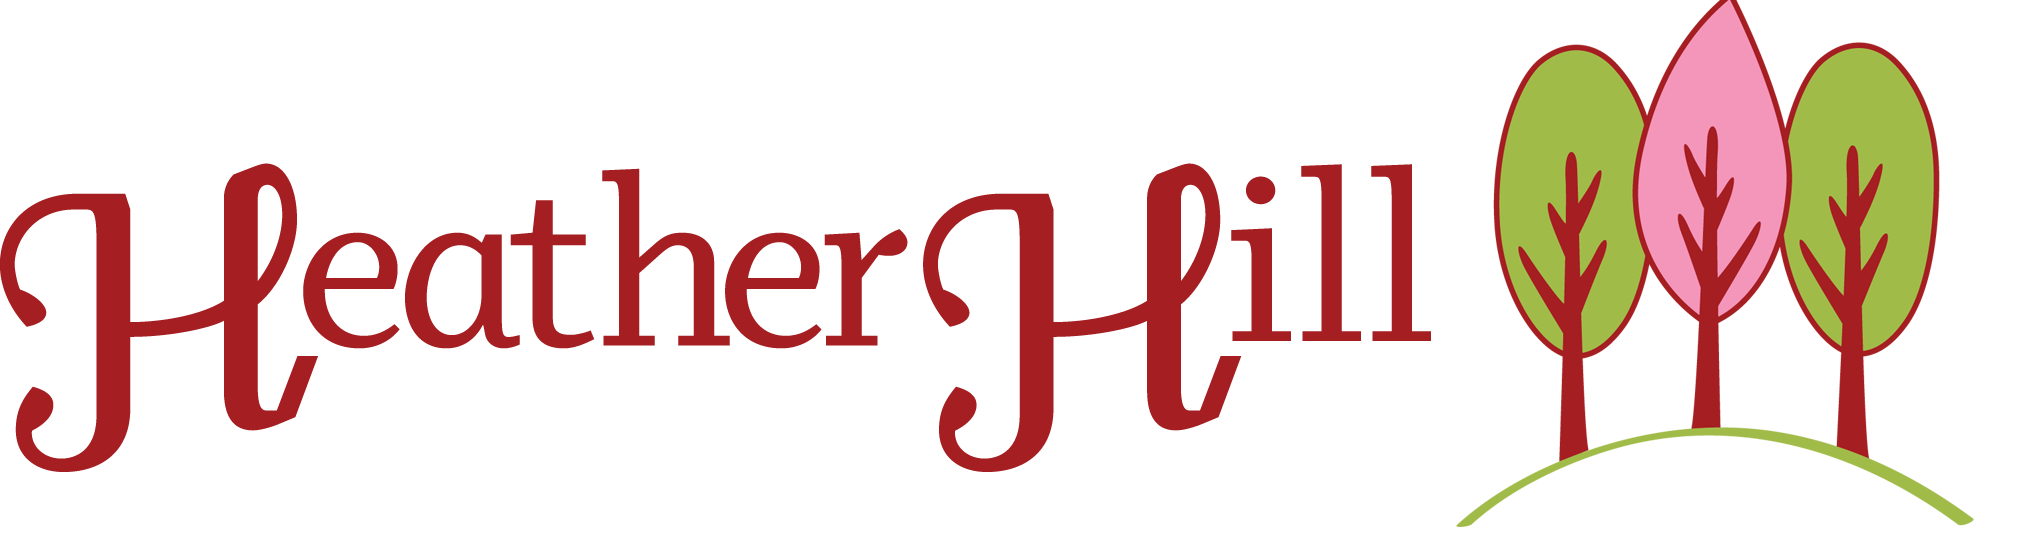 Heather Hill Clothing